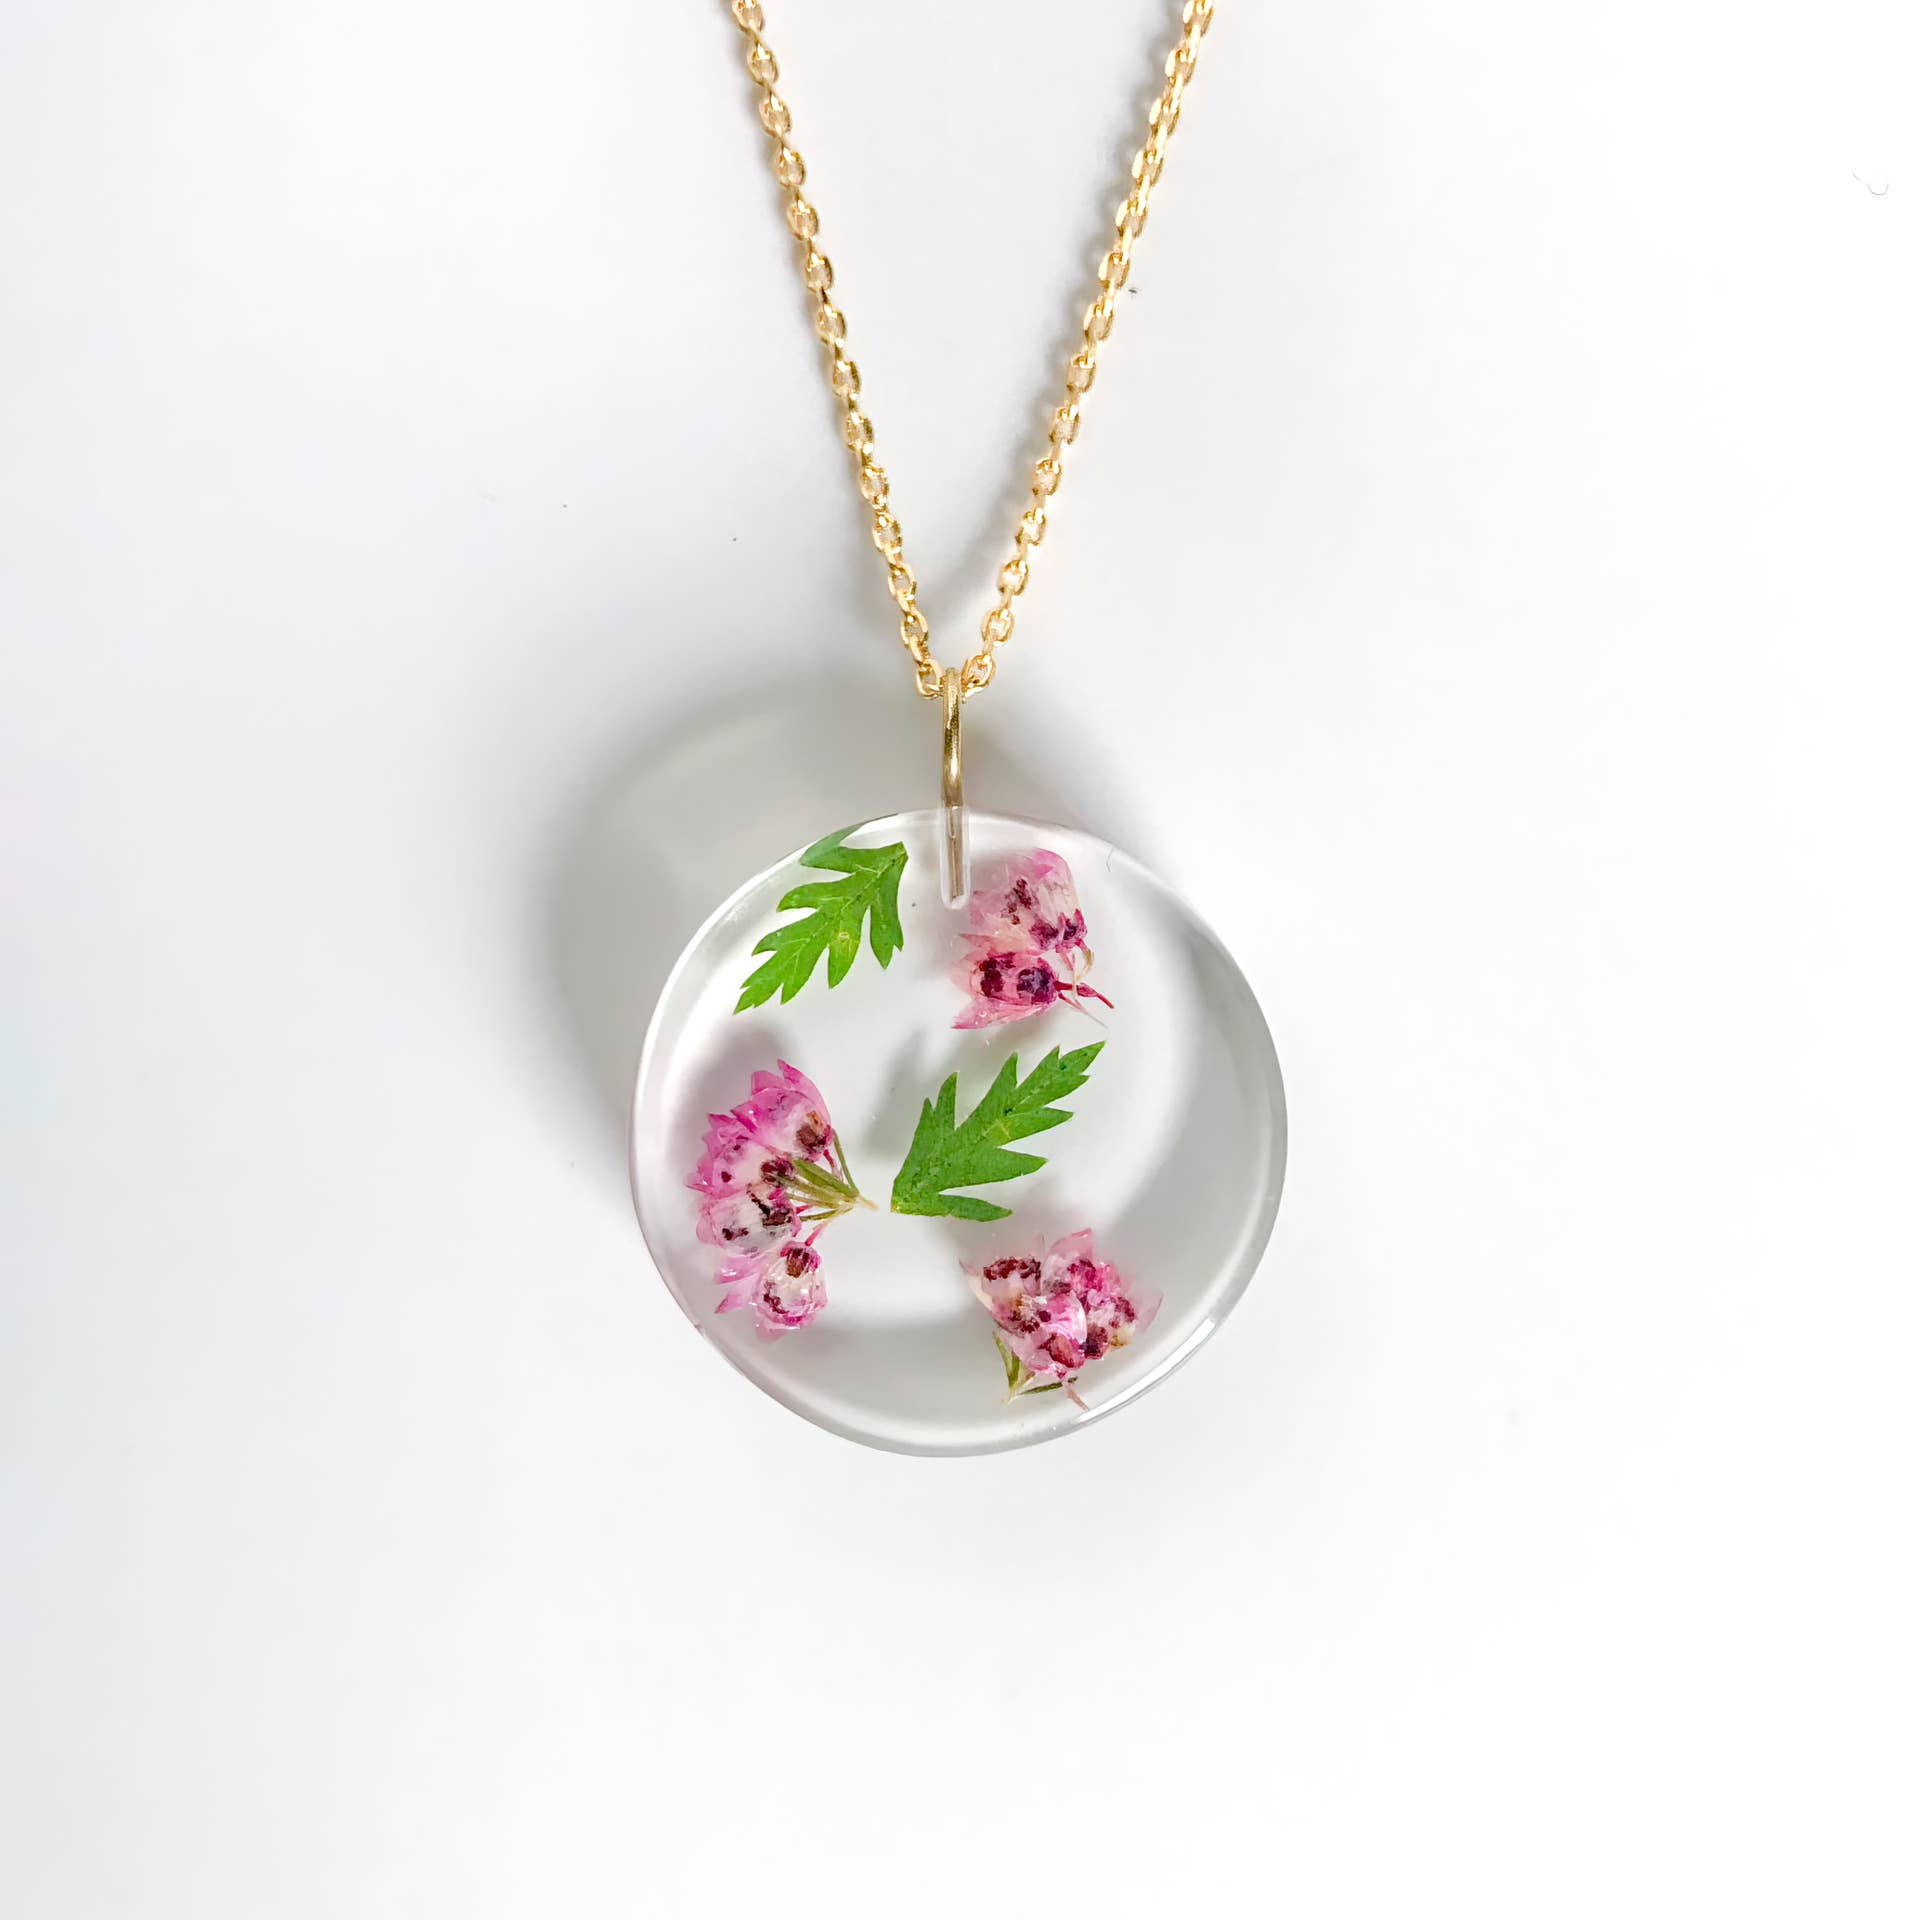 Delicate Birth Flower Necklace in Gift Box Birthmonth Flower Necklace  Bridesmaid Gift - Etsy